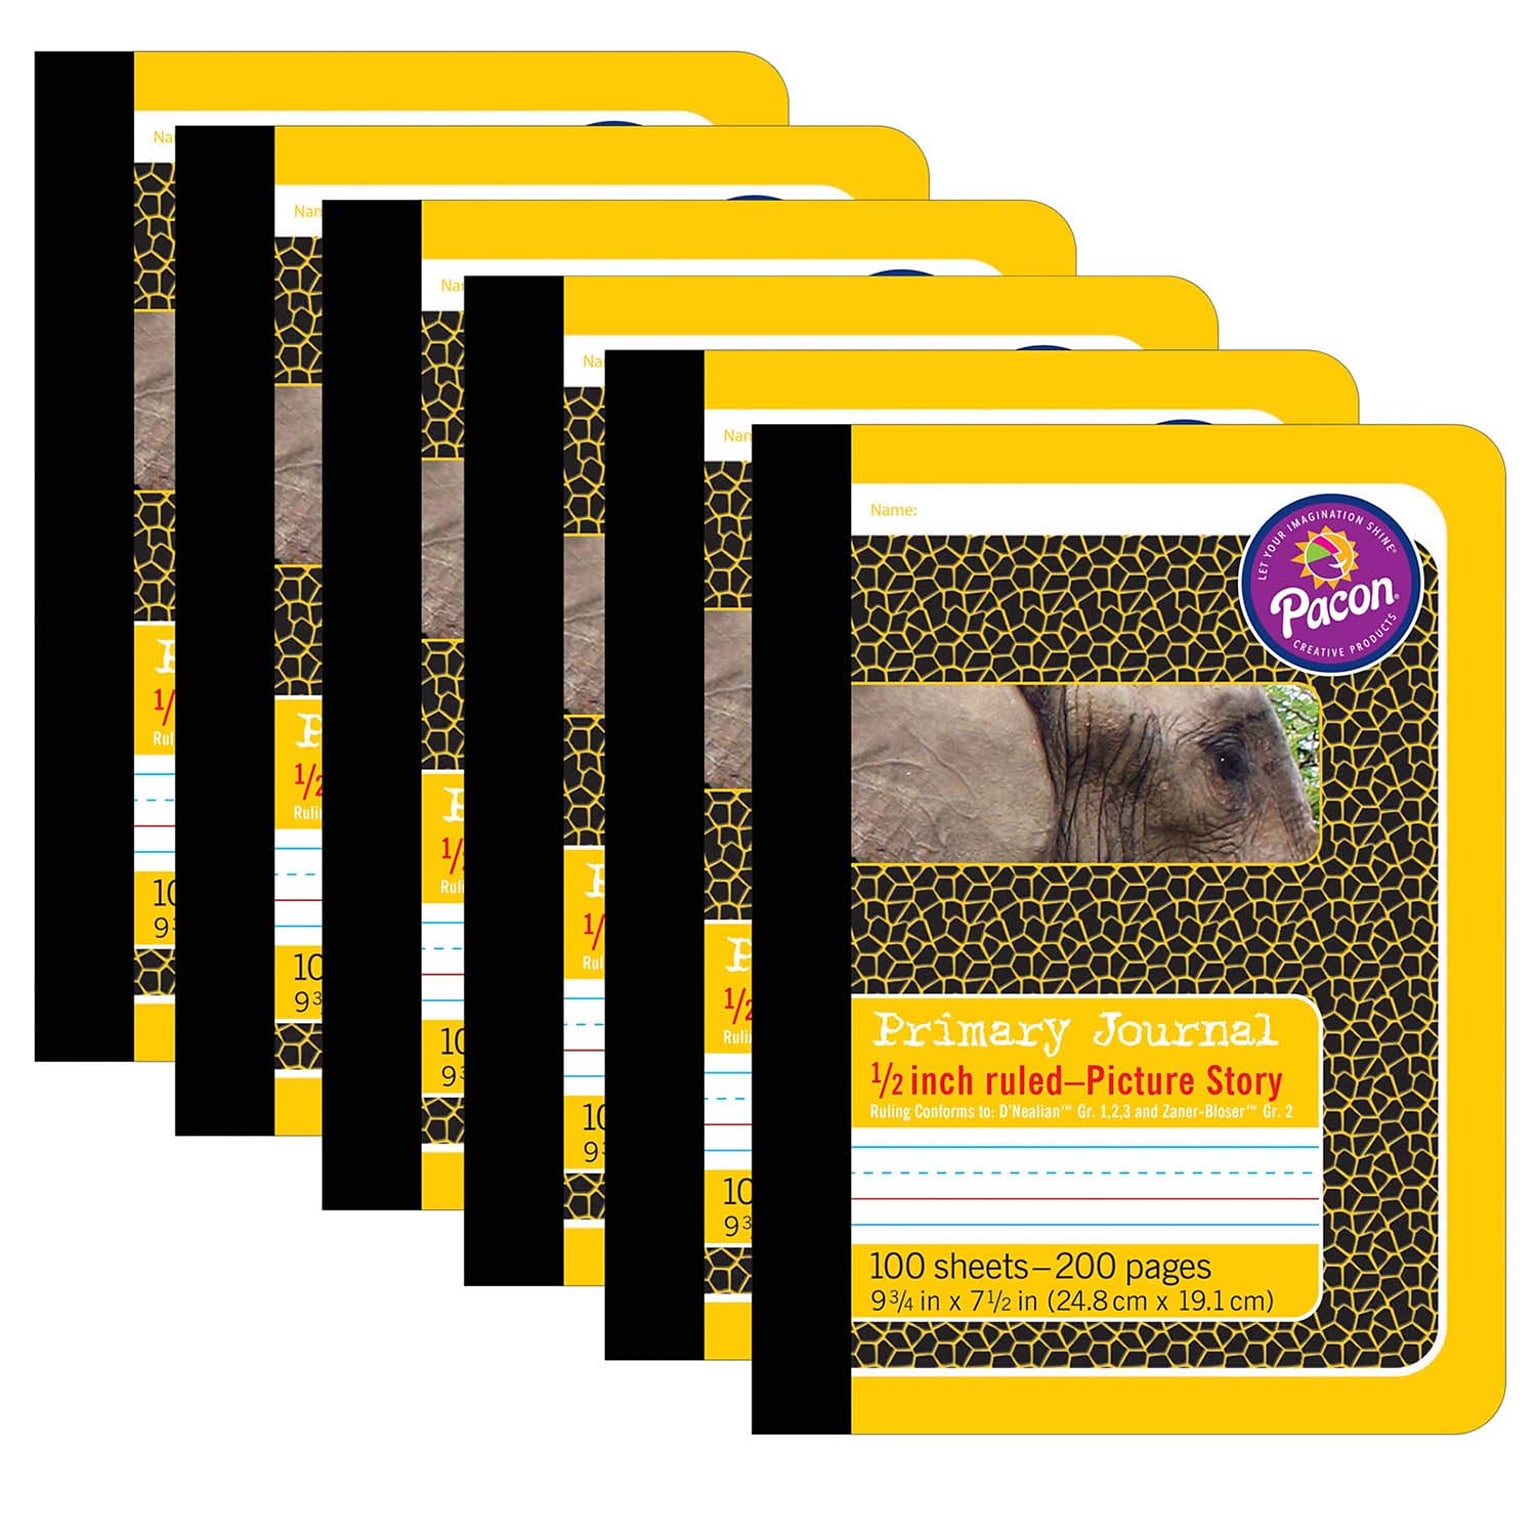 Pacon® Primary Journal, 9.75 x 7.5, .5 Ruled Picture Story, 100 Sheets, Yellow Elephant Cover, Pack of 6 (PAC2426-6)